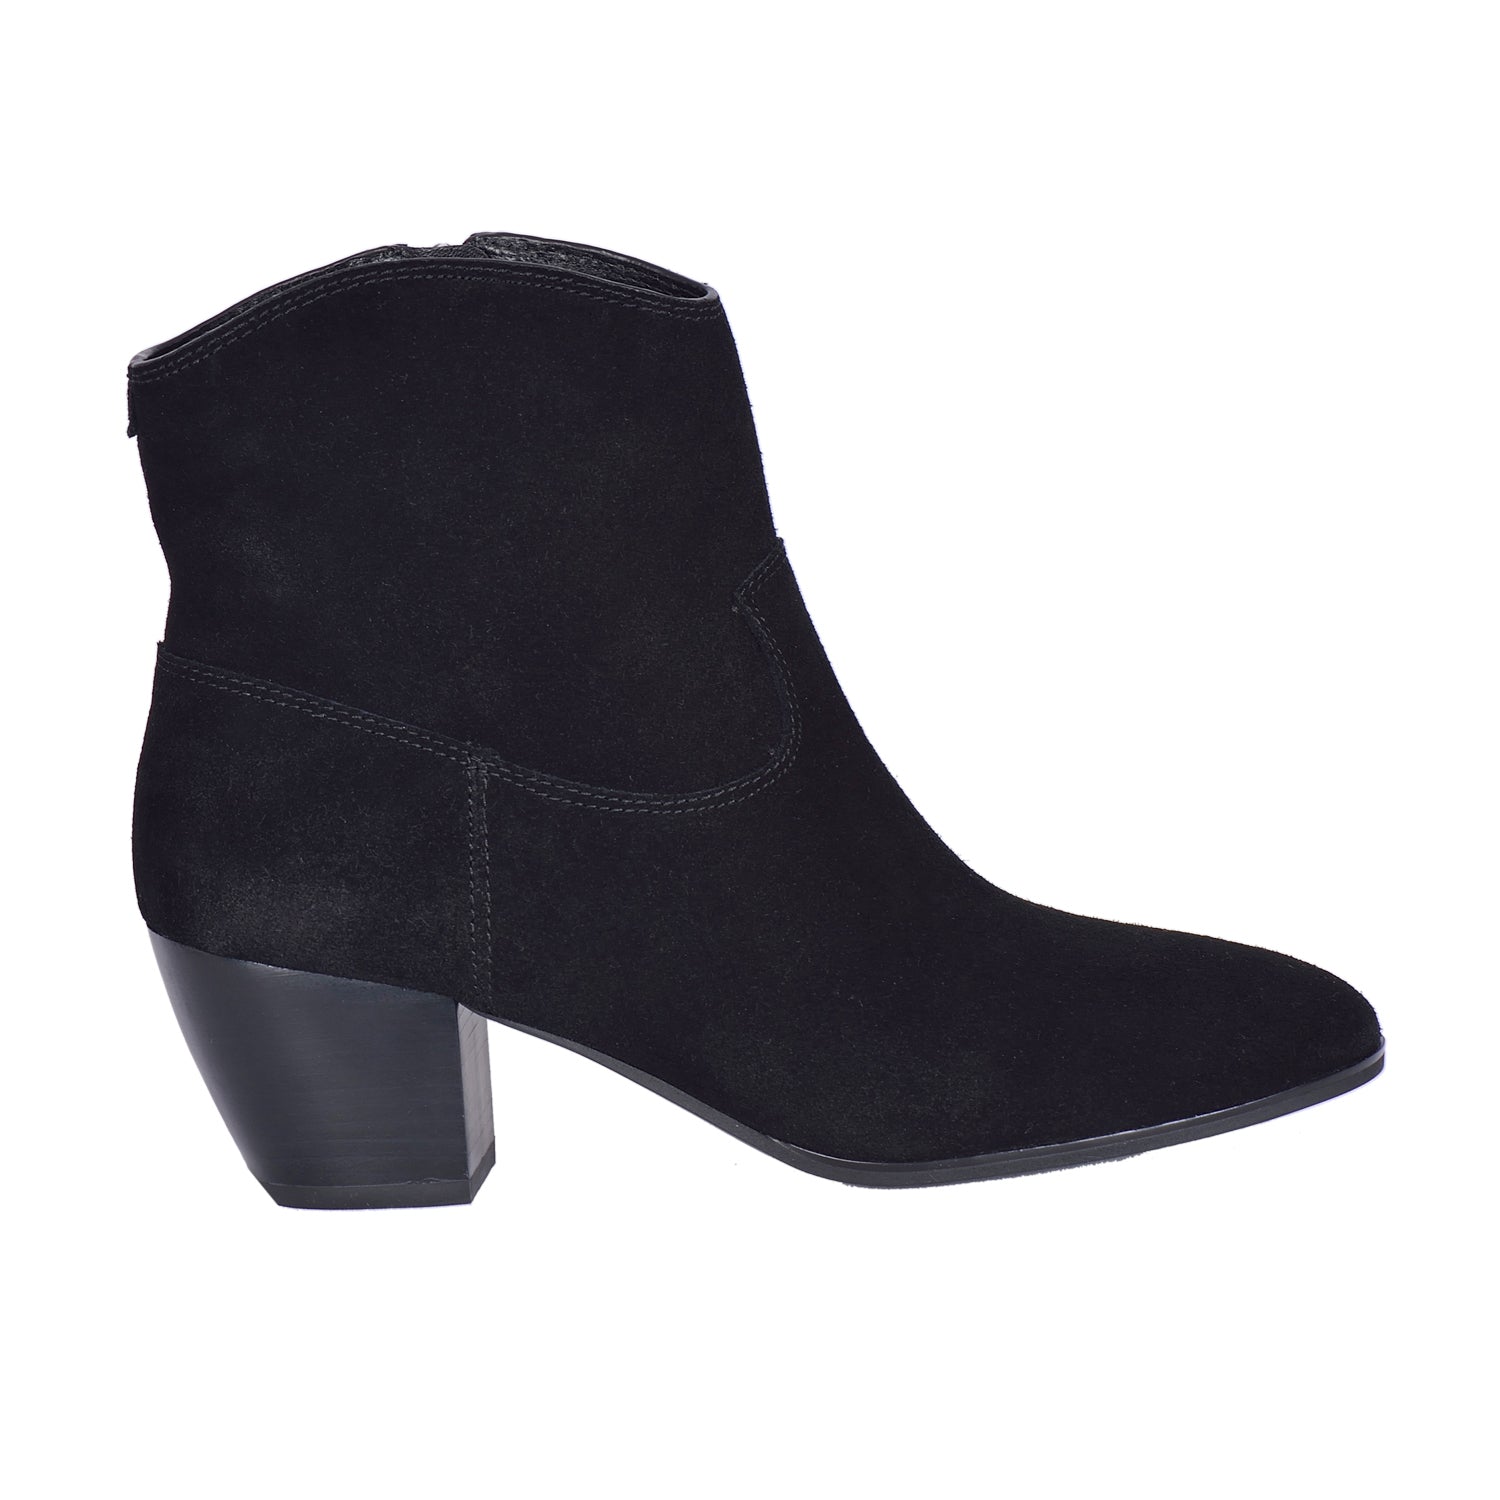 MICHAEL KORS Ankle Boots